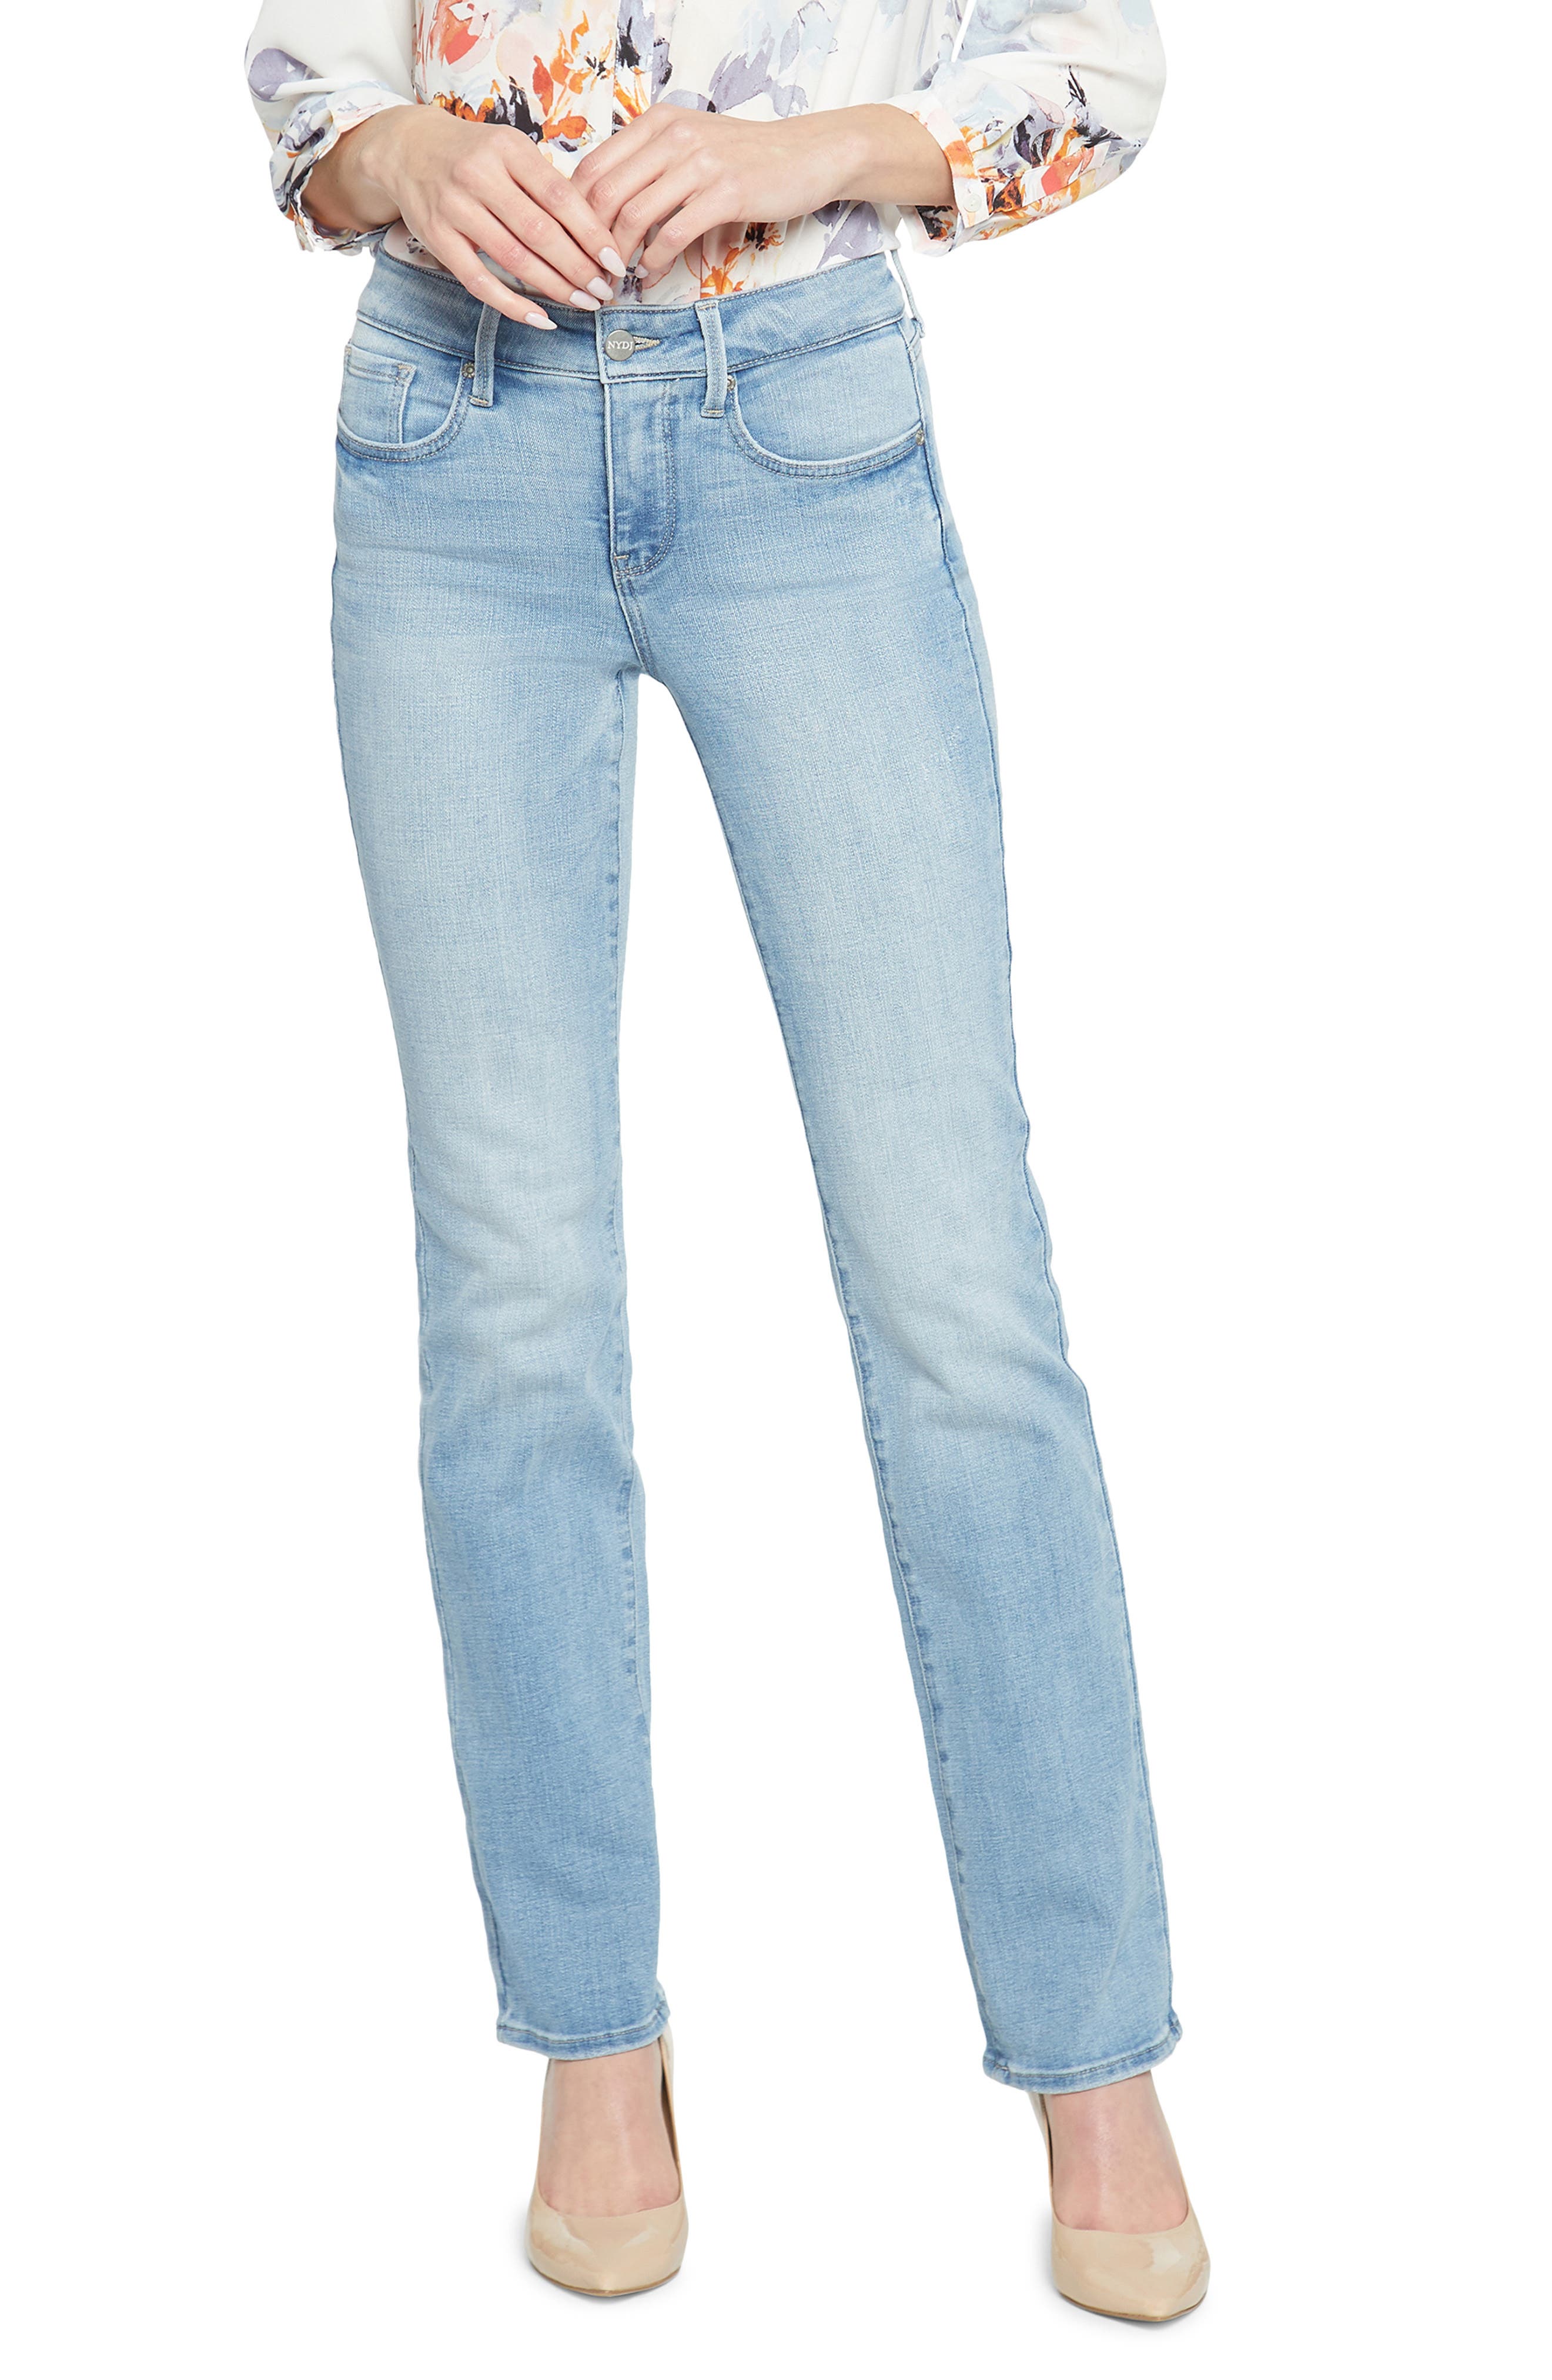 WOMEN FASHION Jeans Print SHEIN straight jeans discount 58% Red S 